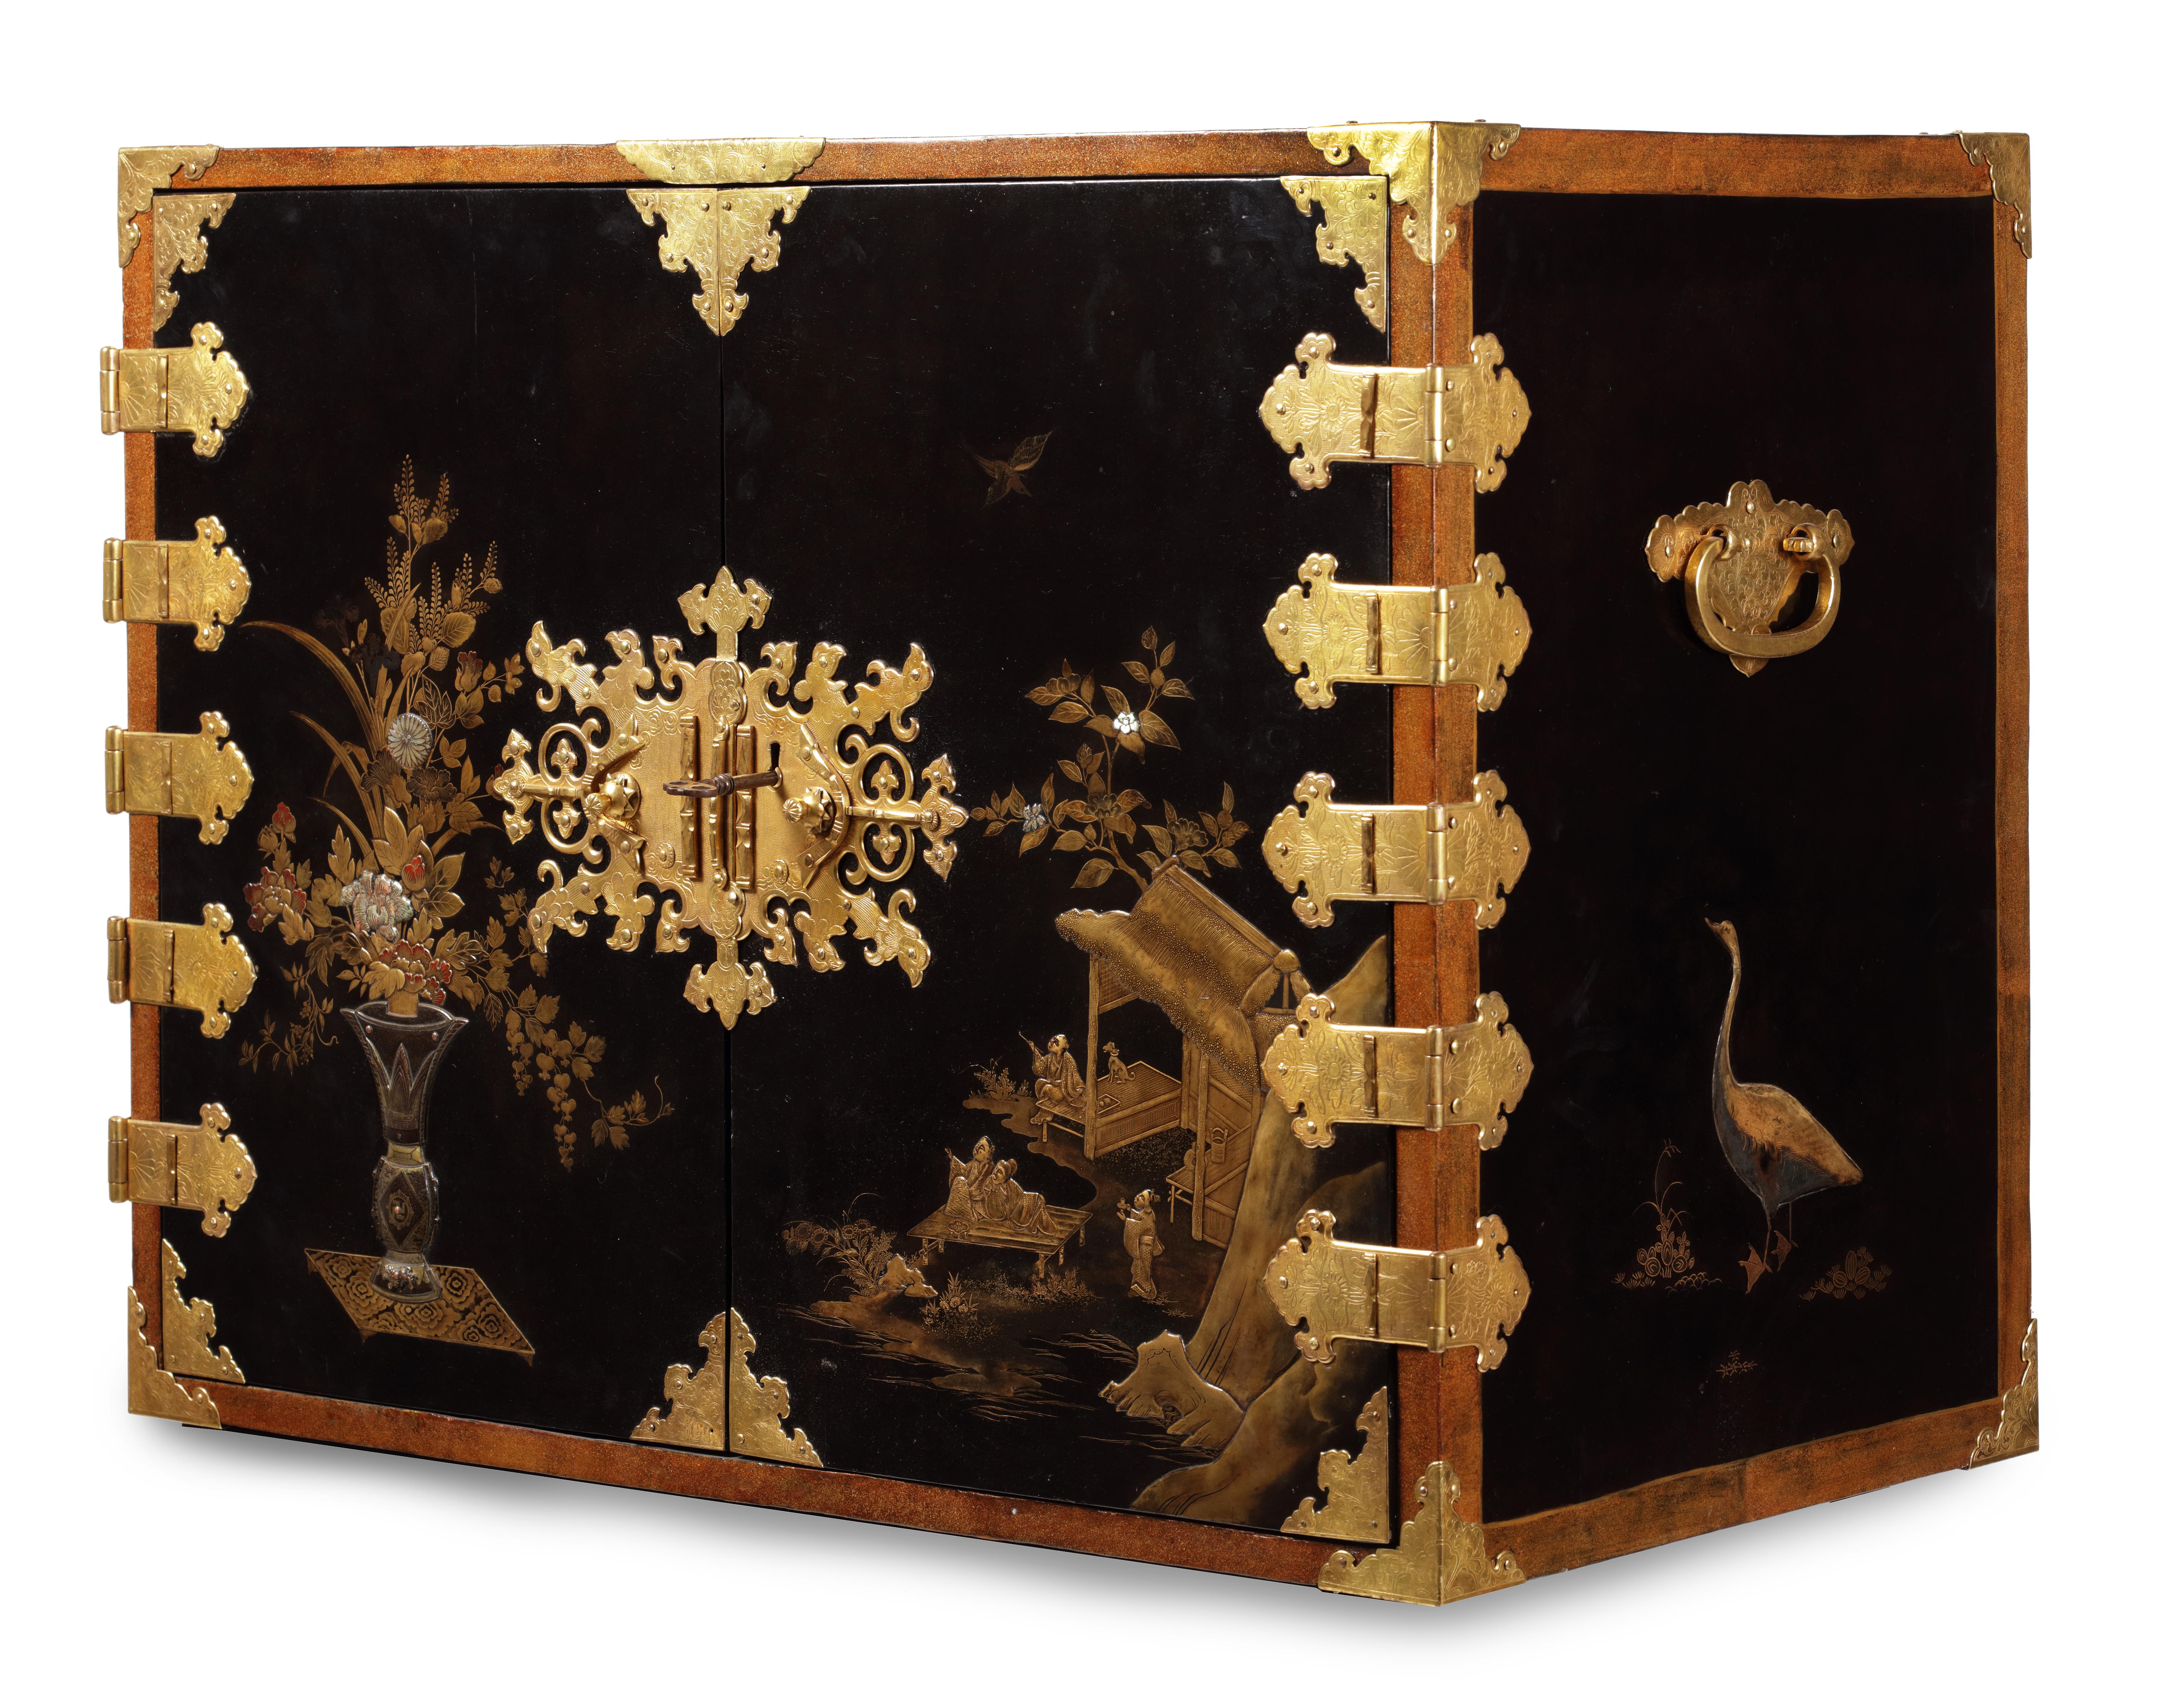 An extremely fine and important Japanese lacquer cabinet with gilt-copper mounts for the European market

Edo period, late 17th century

The pictorial style decorated rectangular cabinet in black lacquer decorated in gold, silver, red and brown